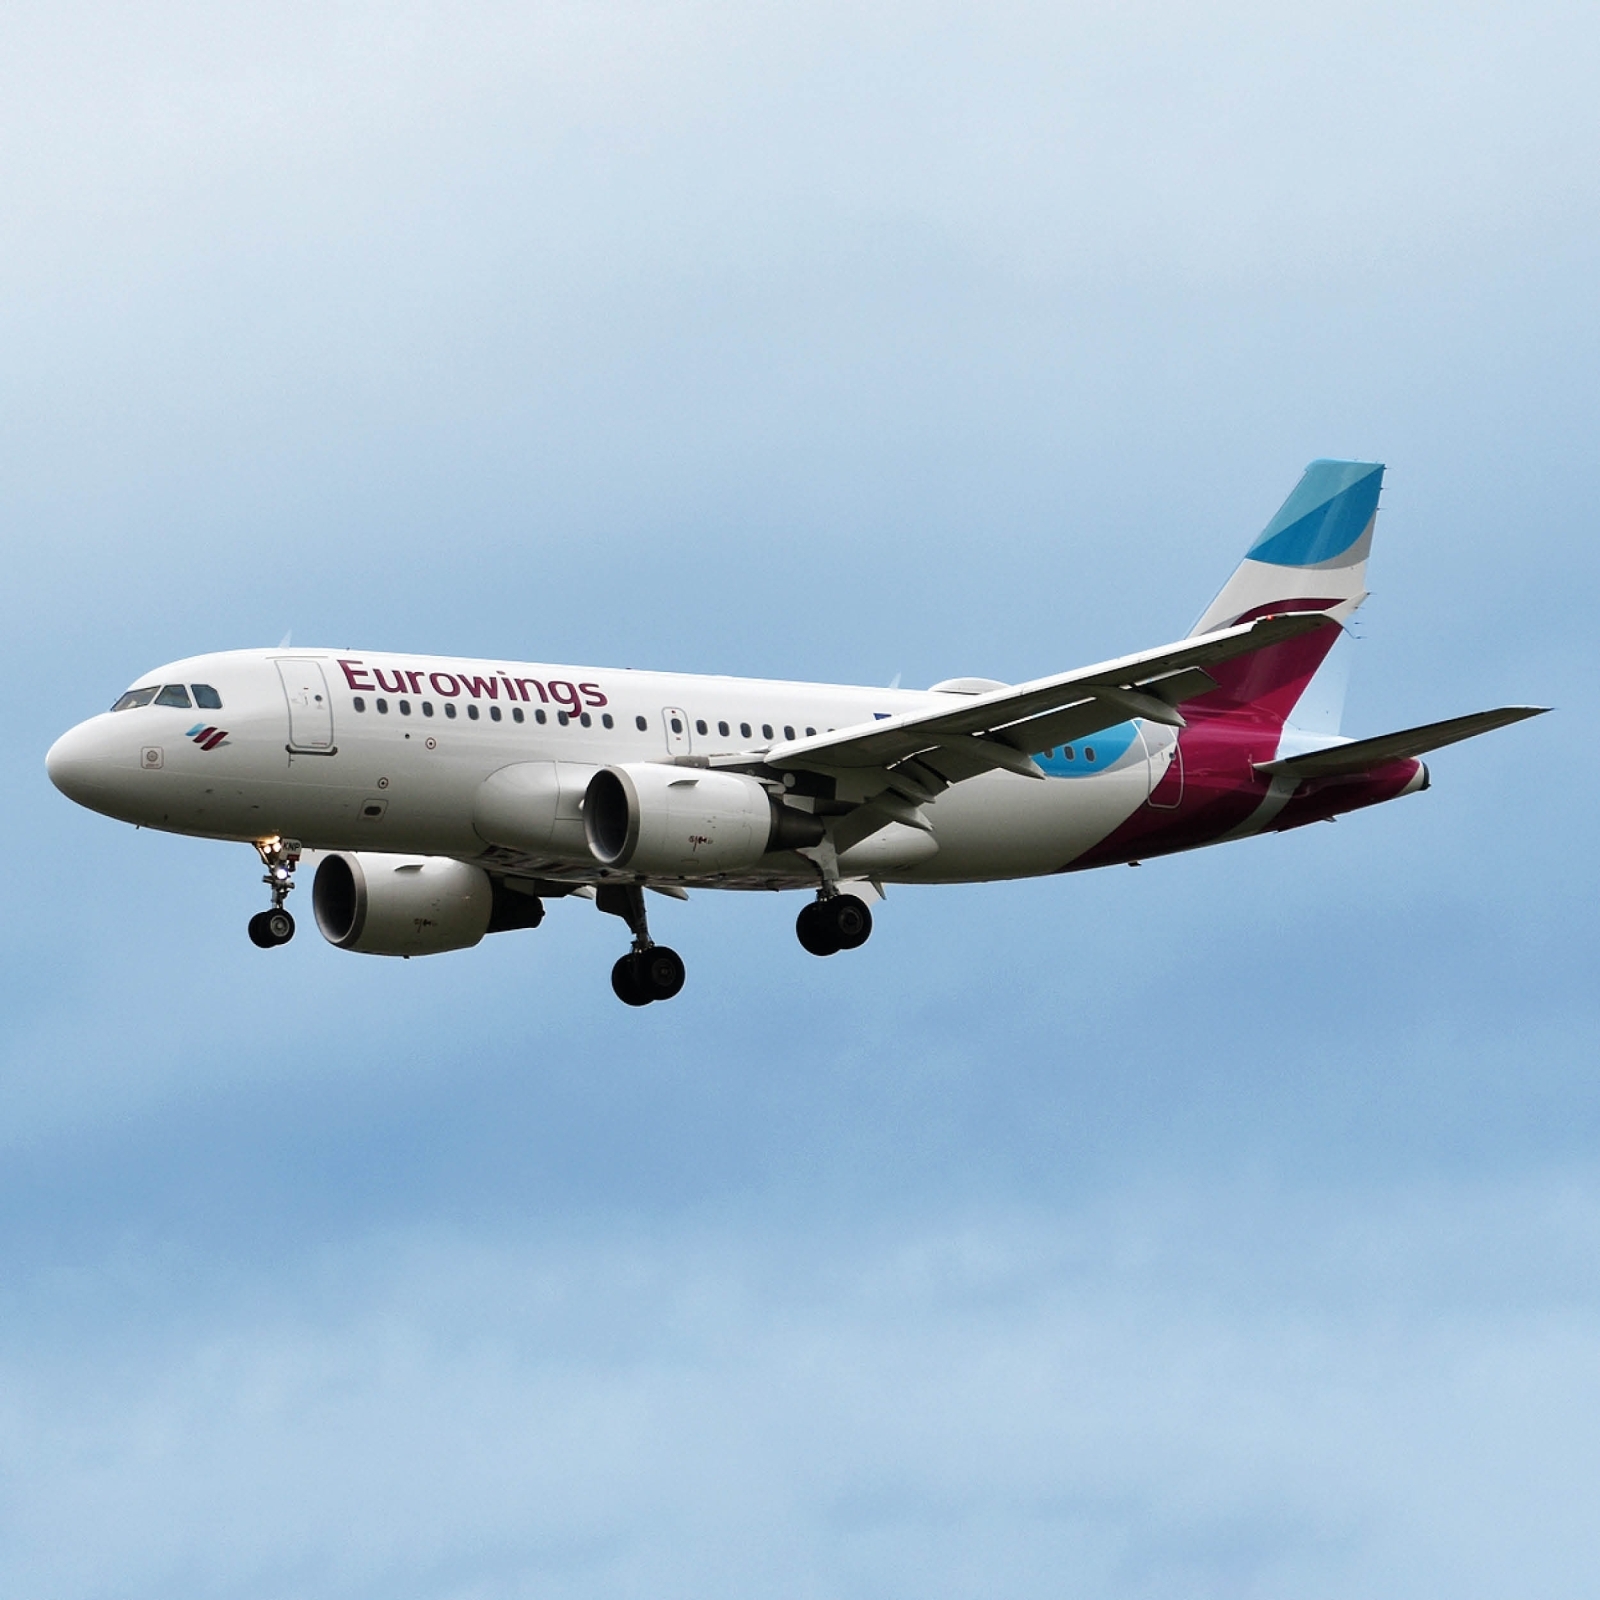 Aviationtag Eurowings - Airbus A319 - D-AKNP White